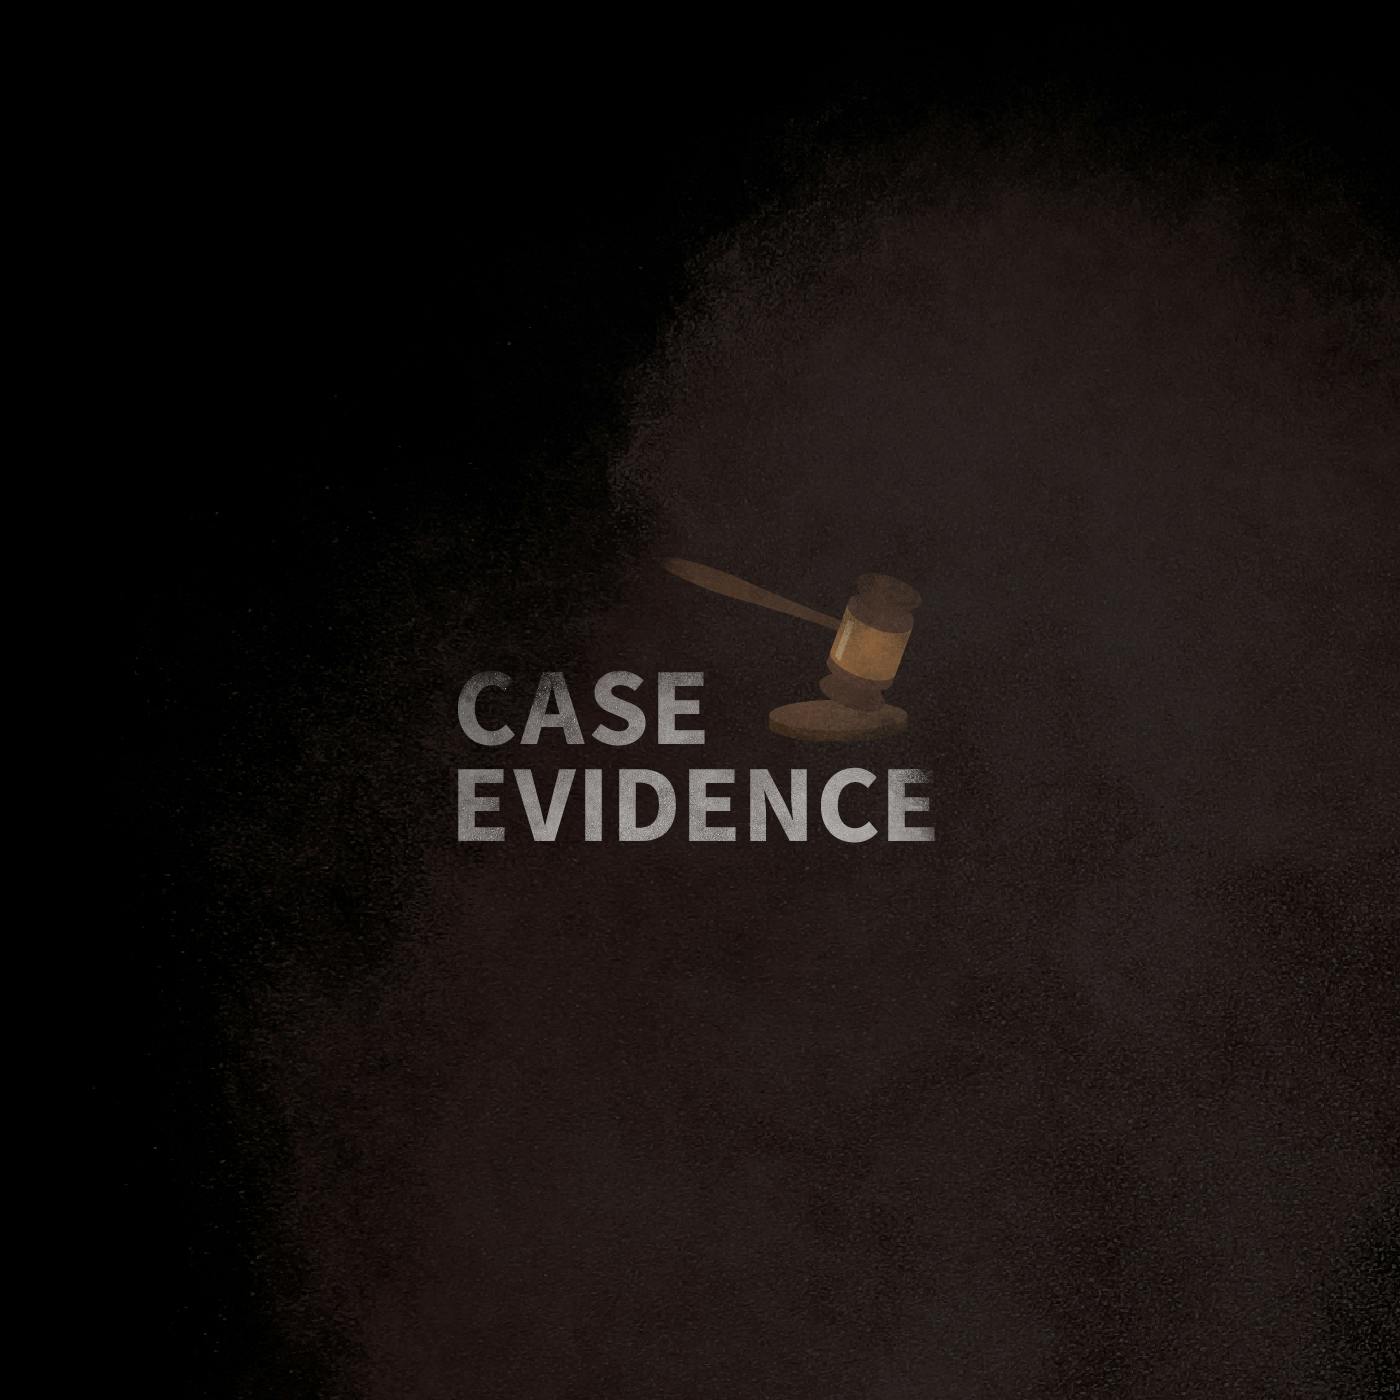 Case Evidence 11.28.16 by Tenderfoot TV